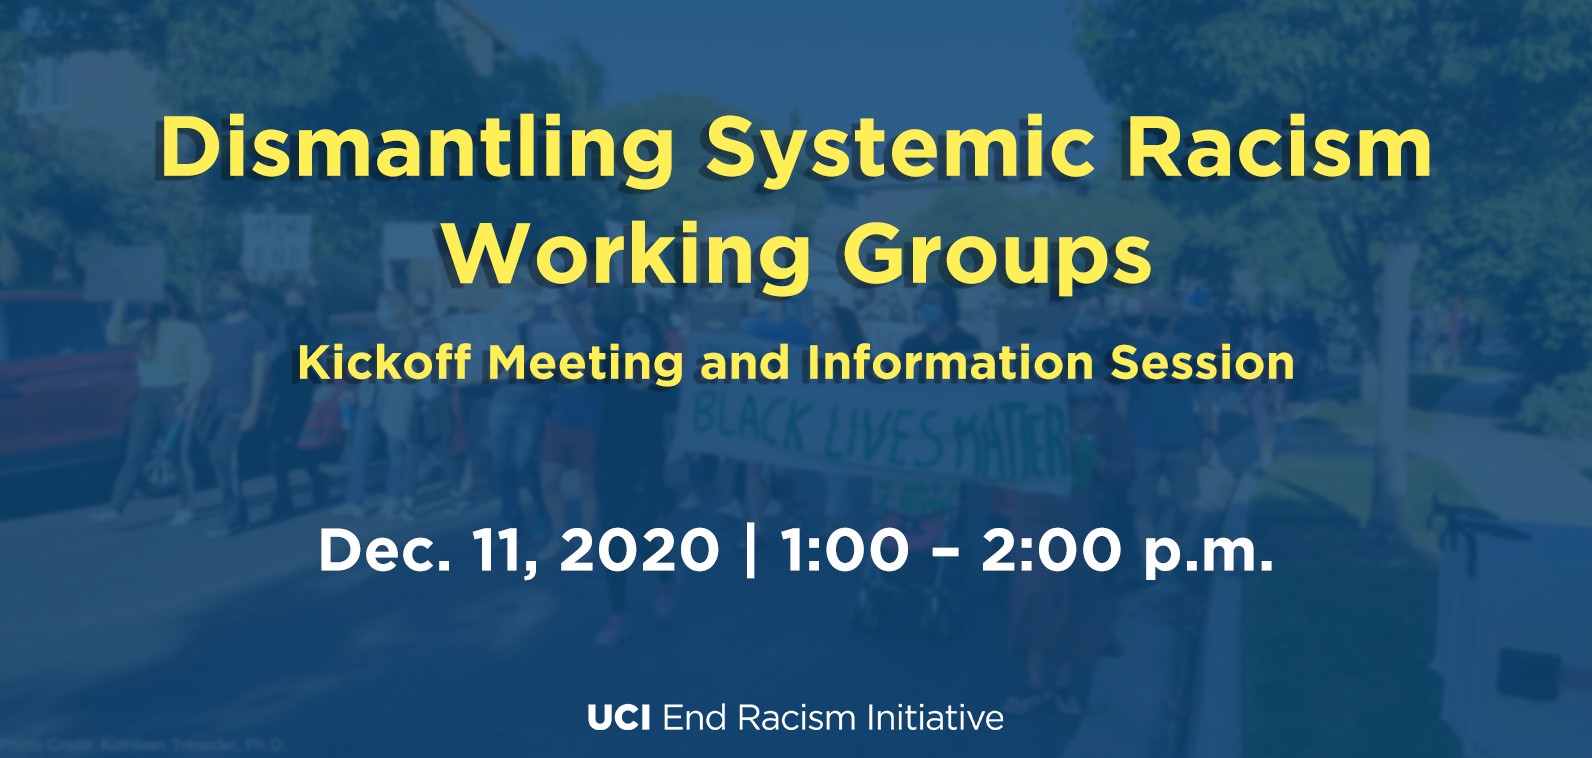 Dismantling Systemic Racism Working Groups Kickoff Meeting and Information Session